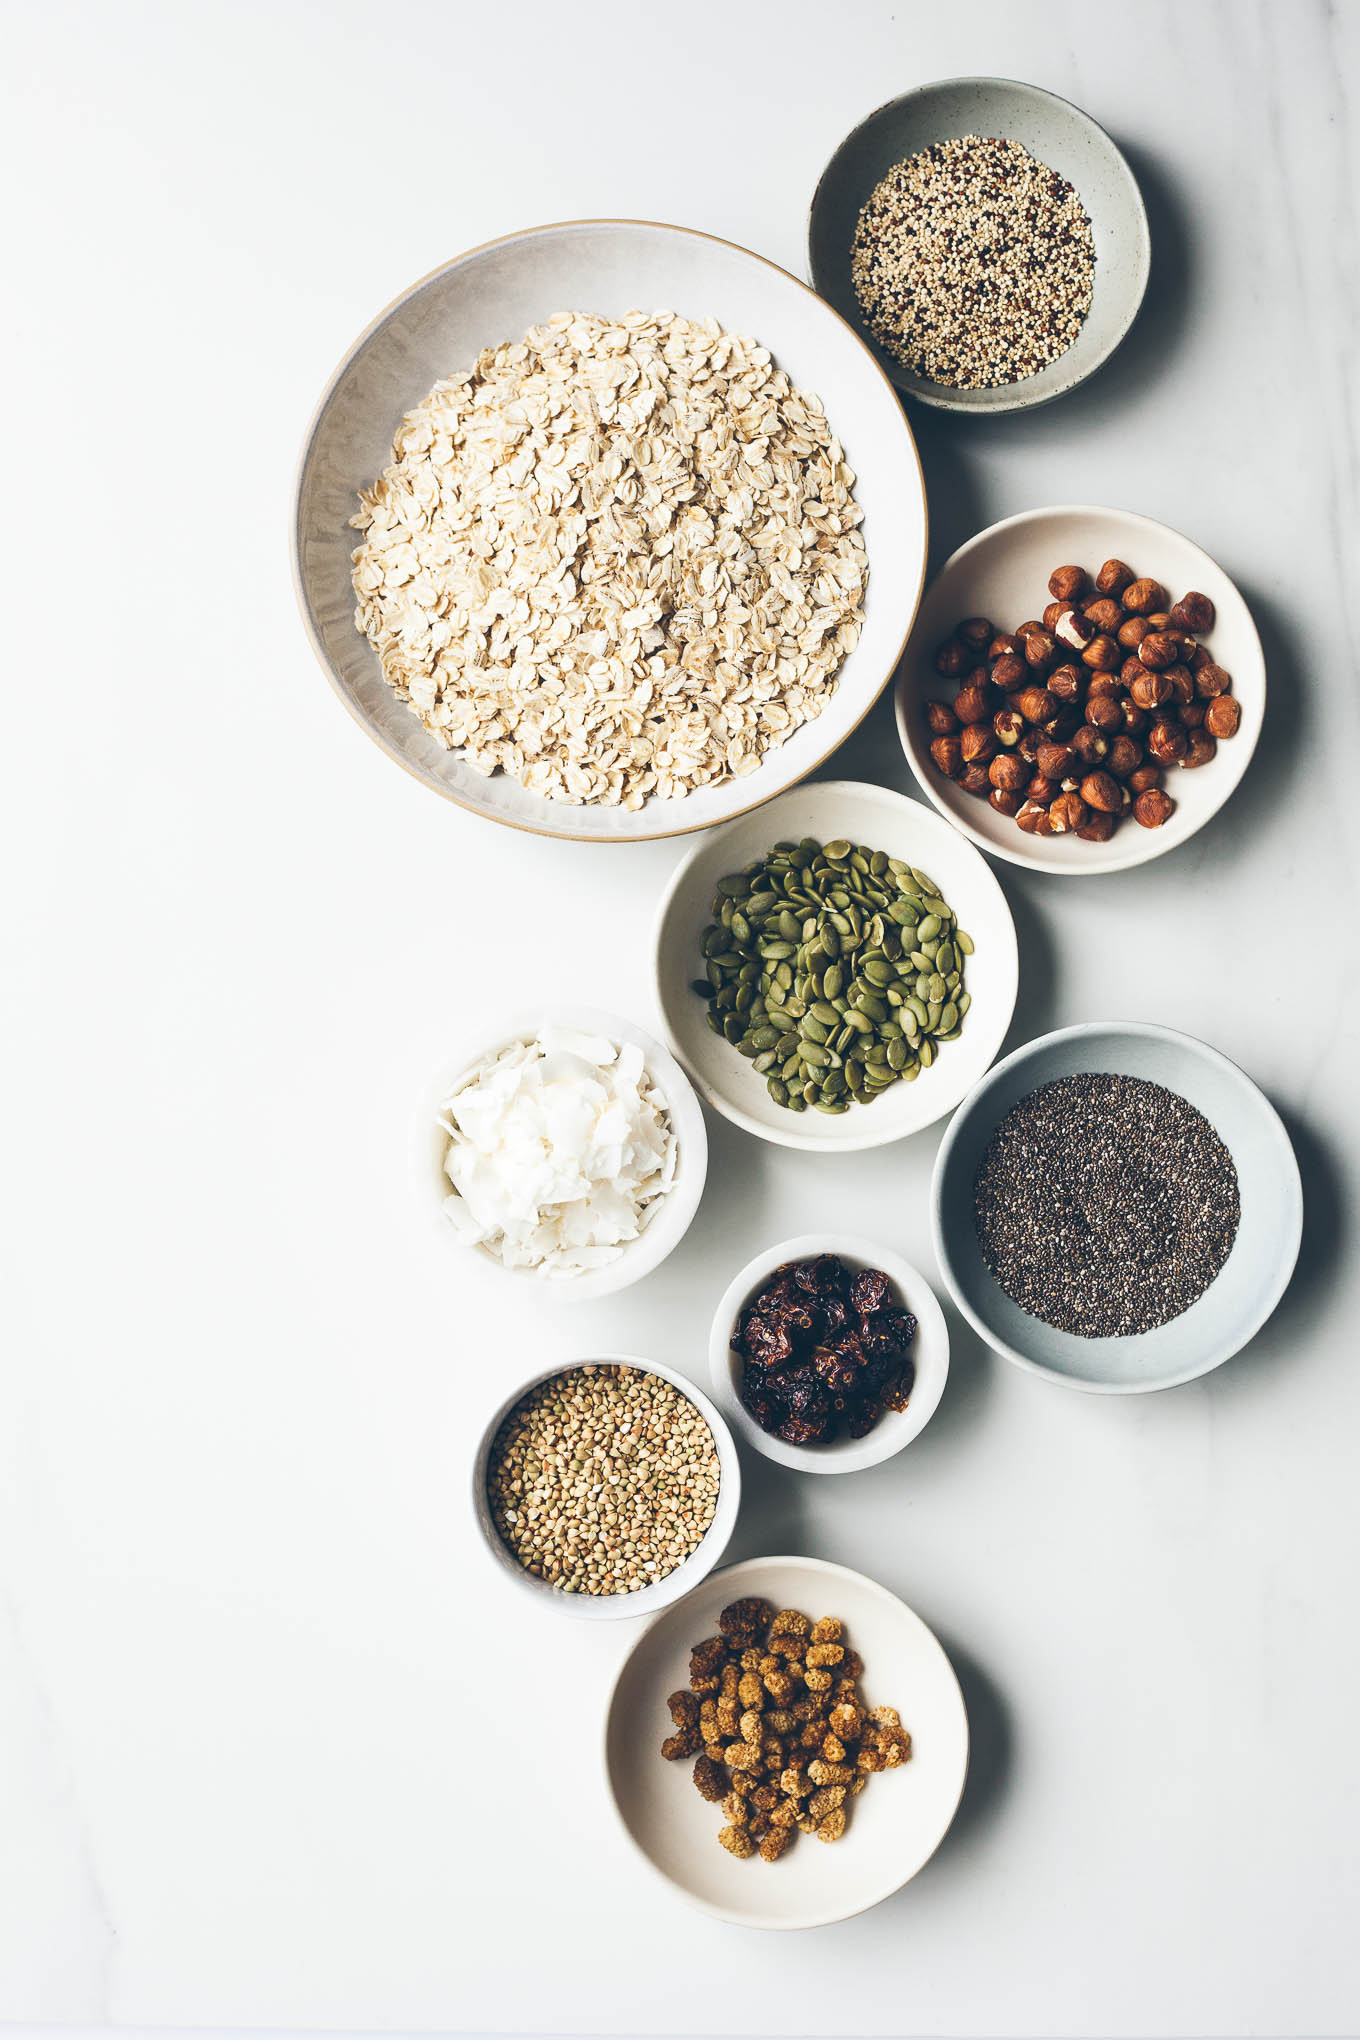 Overhead shot of bowls of ingredients for making granola